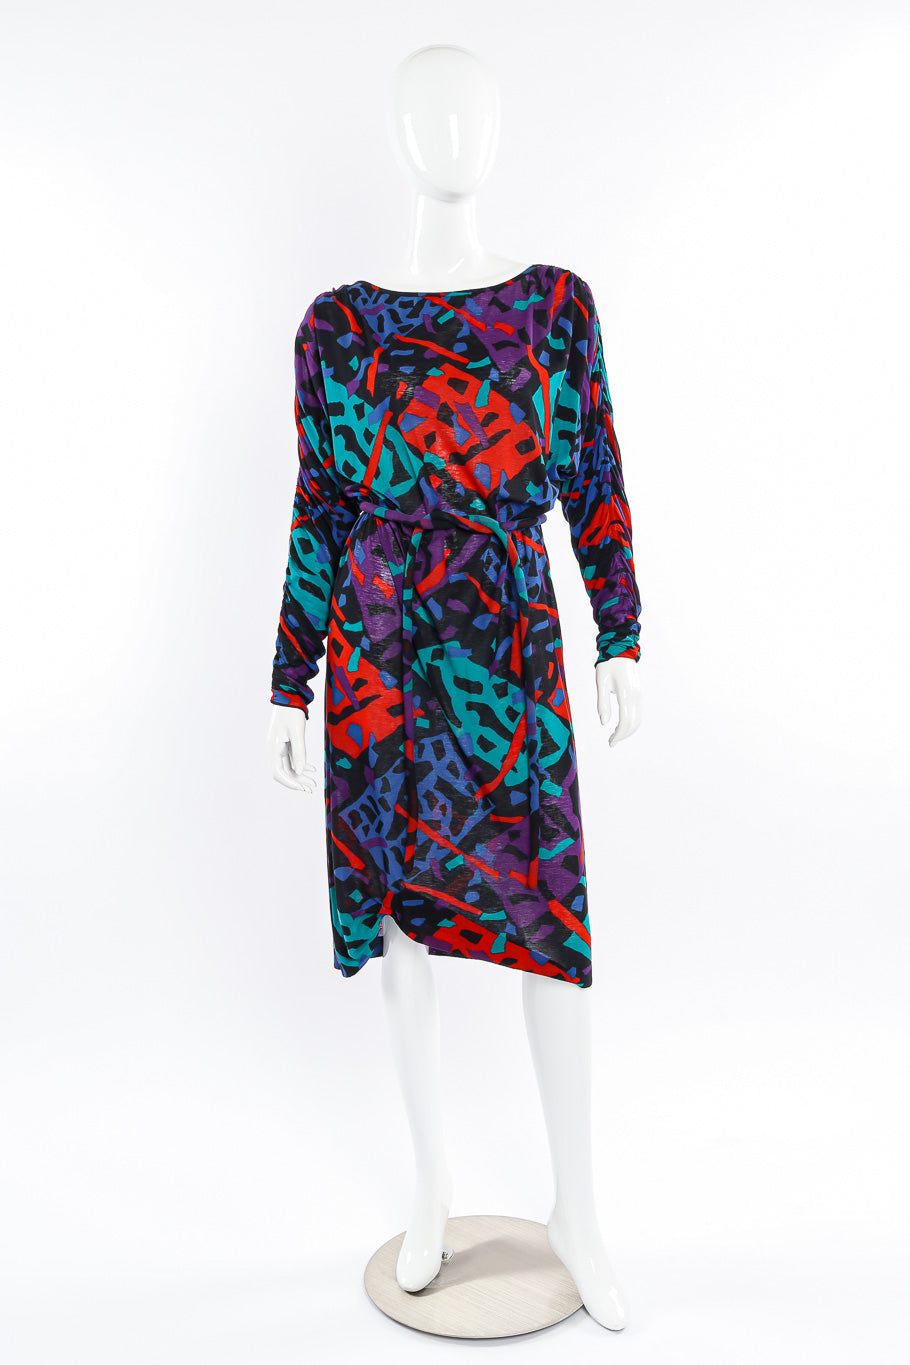 Ruched sleeve batwing dress by Missoni on mannequin @recessla